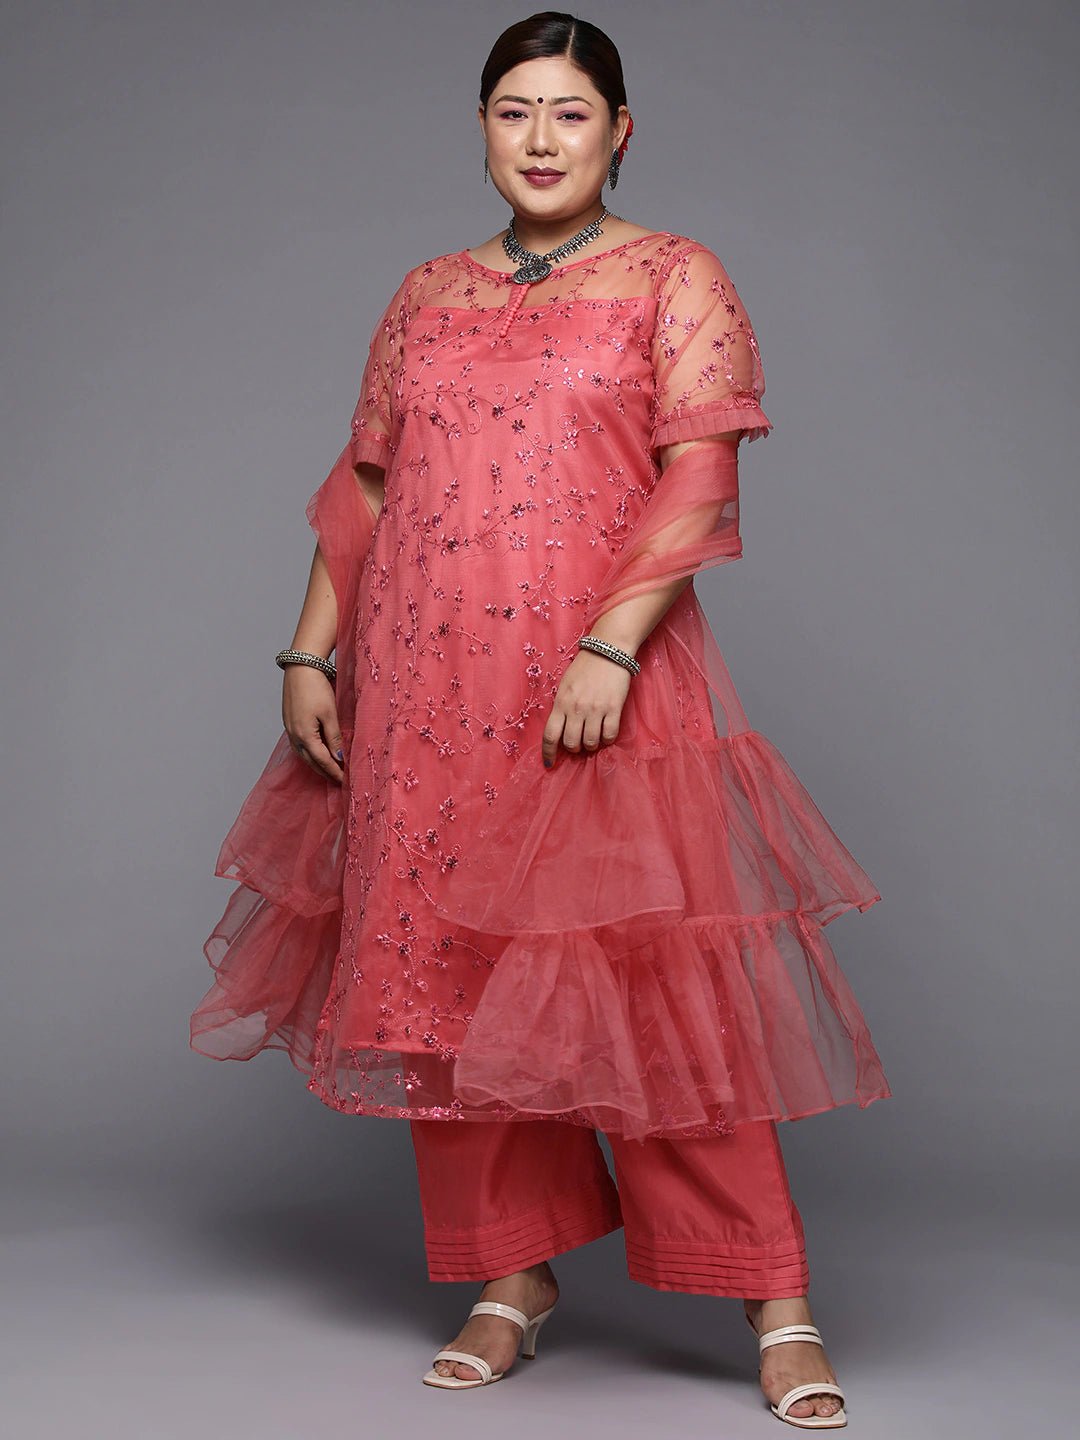 Women Plus Size Coral Pink Floral Sequinned Kurta with Palazzos & Dupatta - Inddus.com